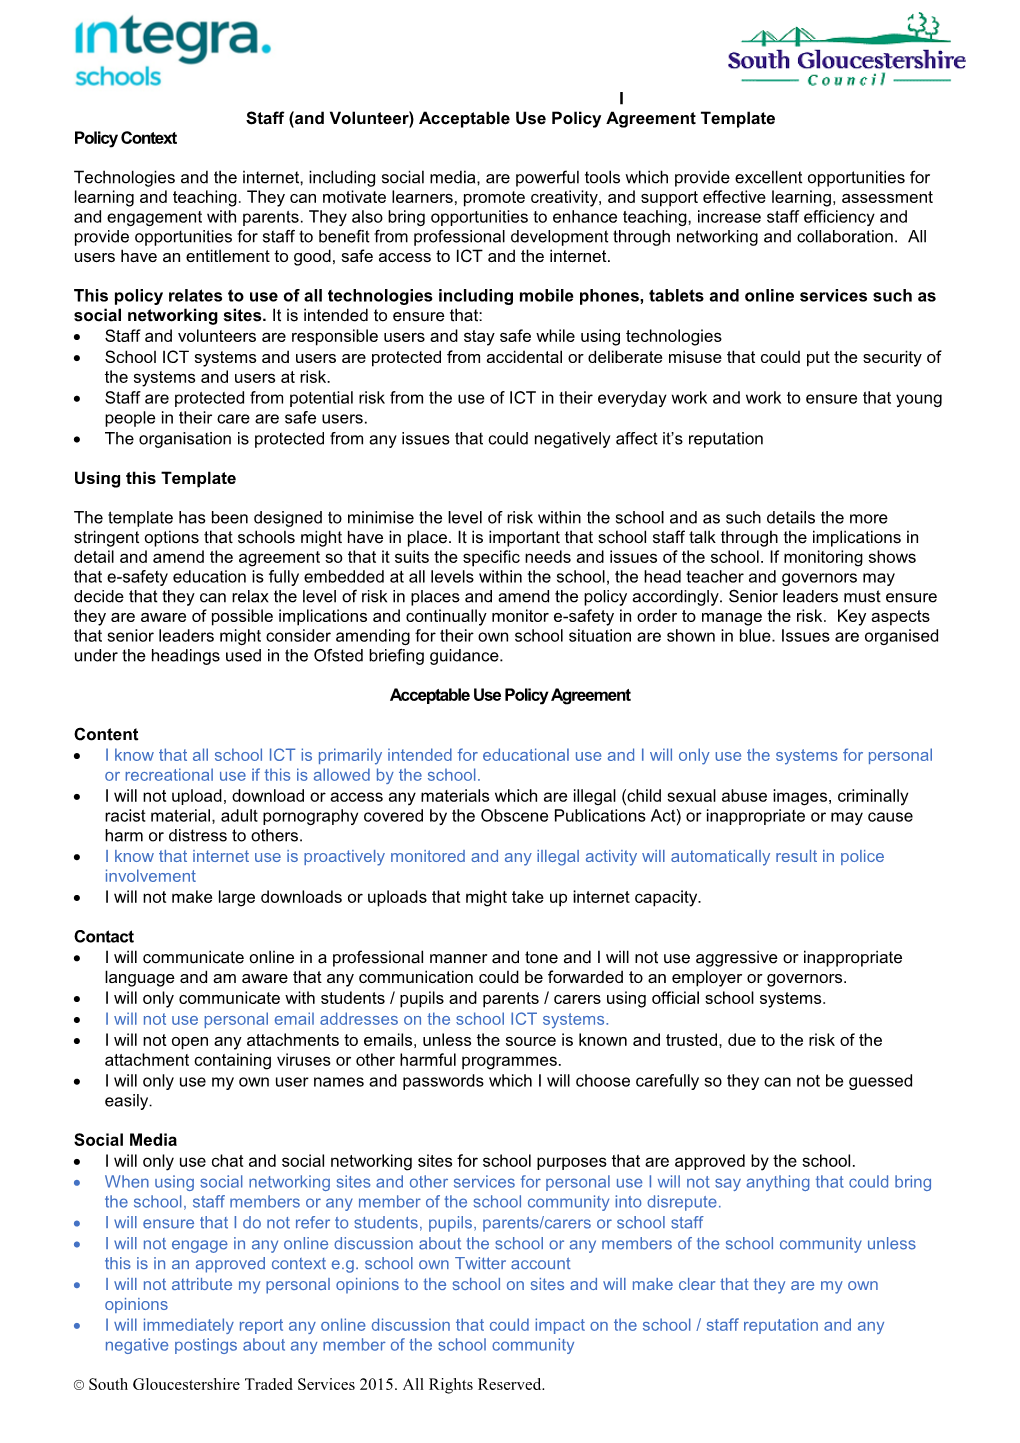 Staff (And Volunteer) Acceptable Use Policy Agreement Template